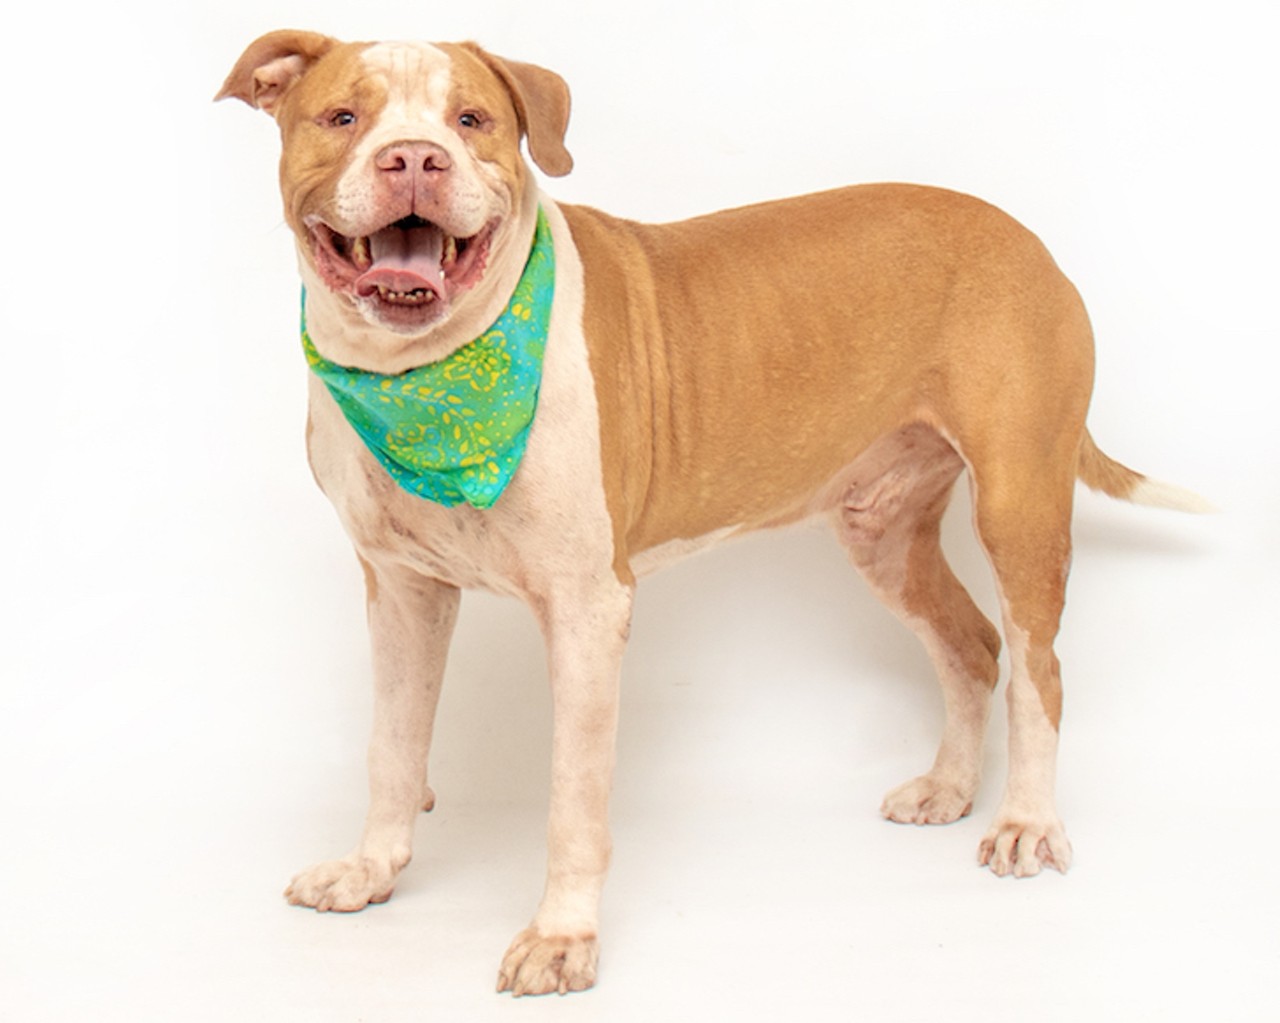 22 adoptable Orange County dogs ready to be your new best friend